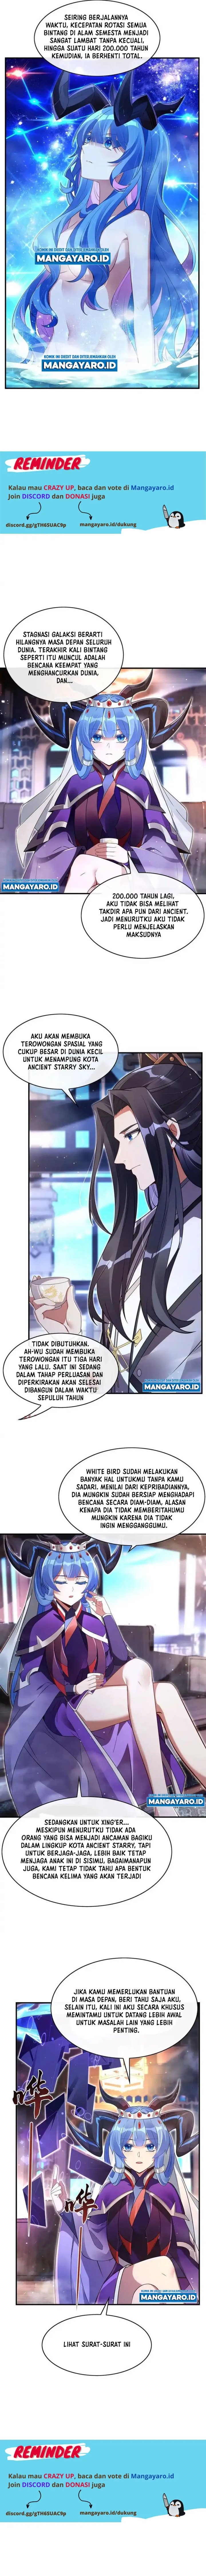 Dilarang COPAS - situs resmi www.mangacanblog.com - Komik my female apprentices are all big shots from the future 277 - chapter 277 278 Indonesia my female apprentices are all big shots from the future 277 - chapter 277 Terbaru 4|Baca Manga Komik Indonesia|Mangacan